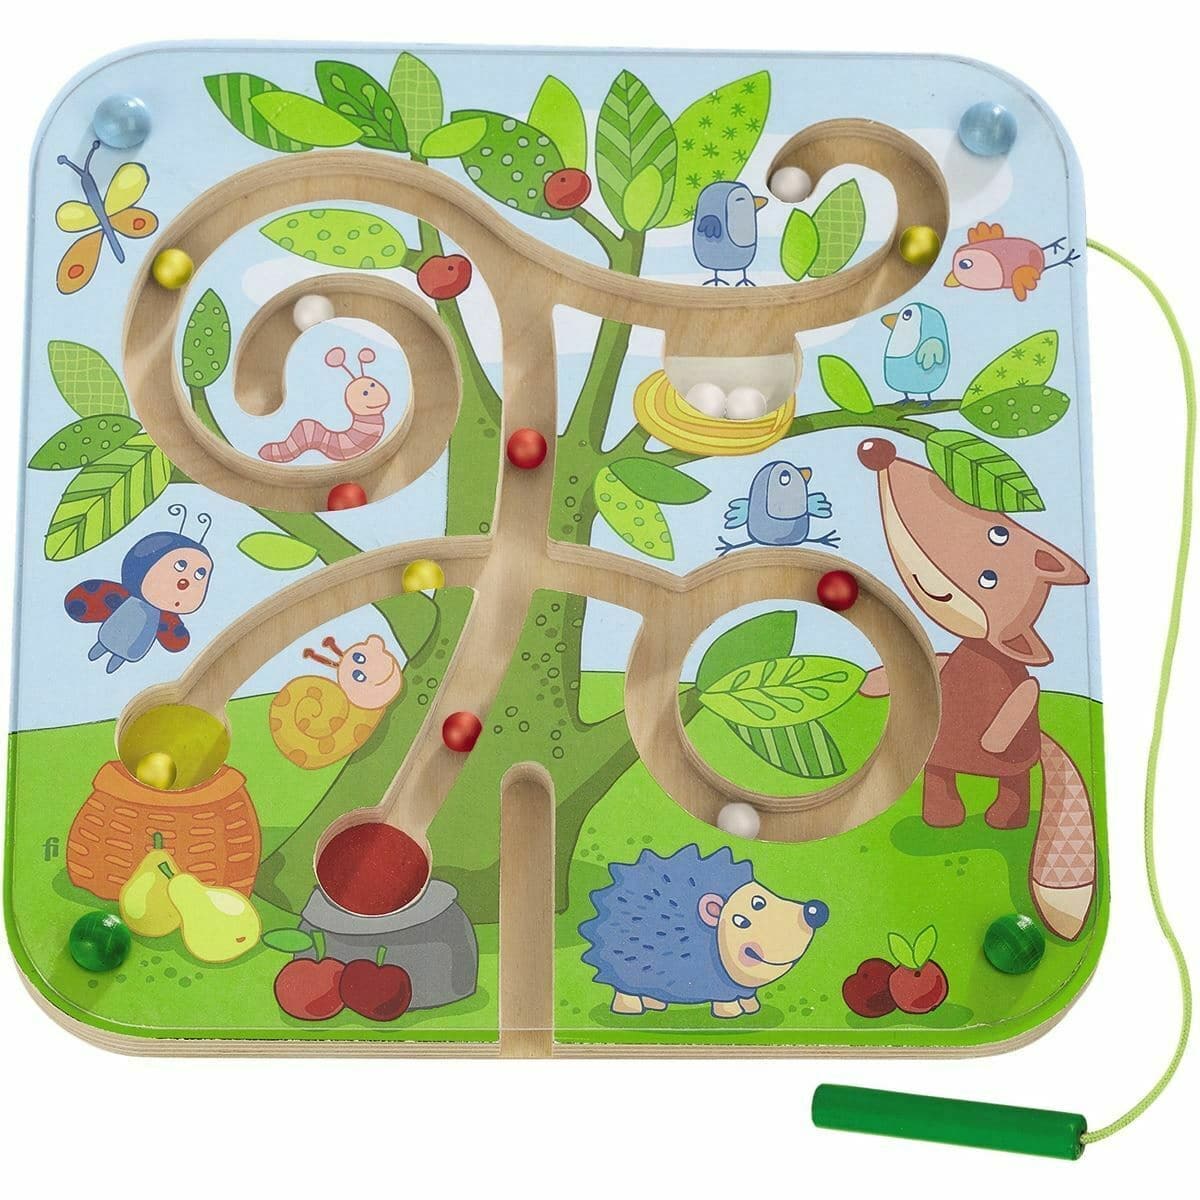 HABA Tree Maze Magnetic Puzzle Game